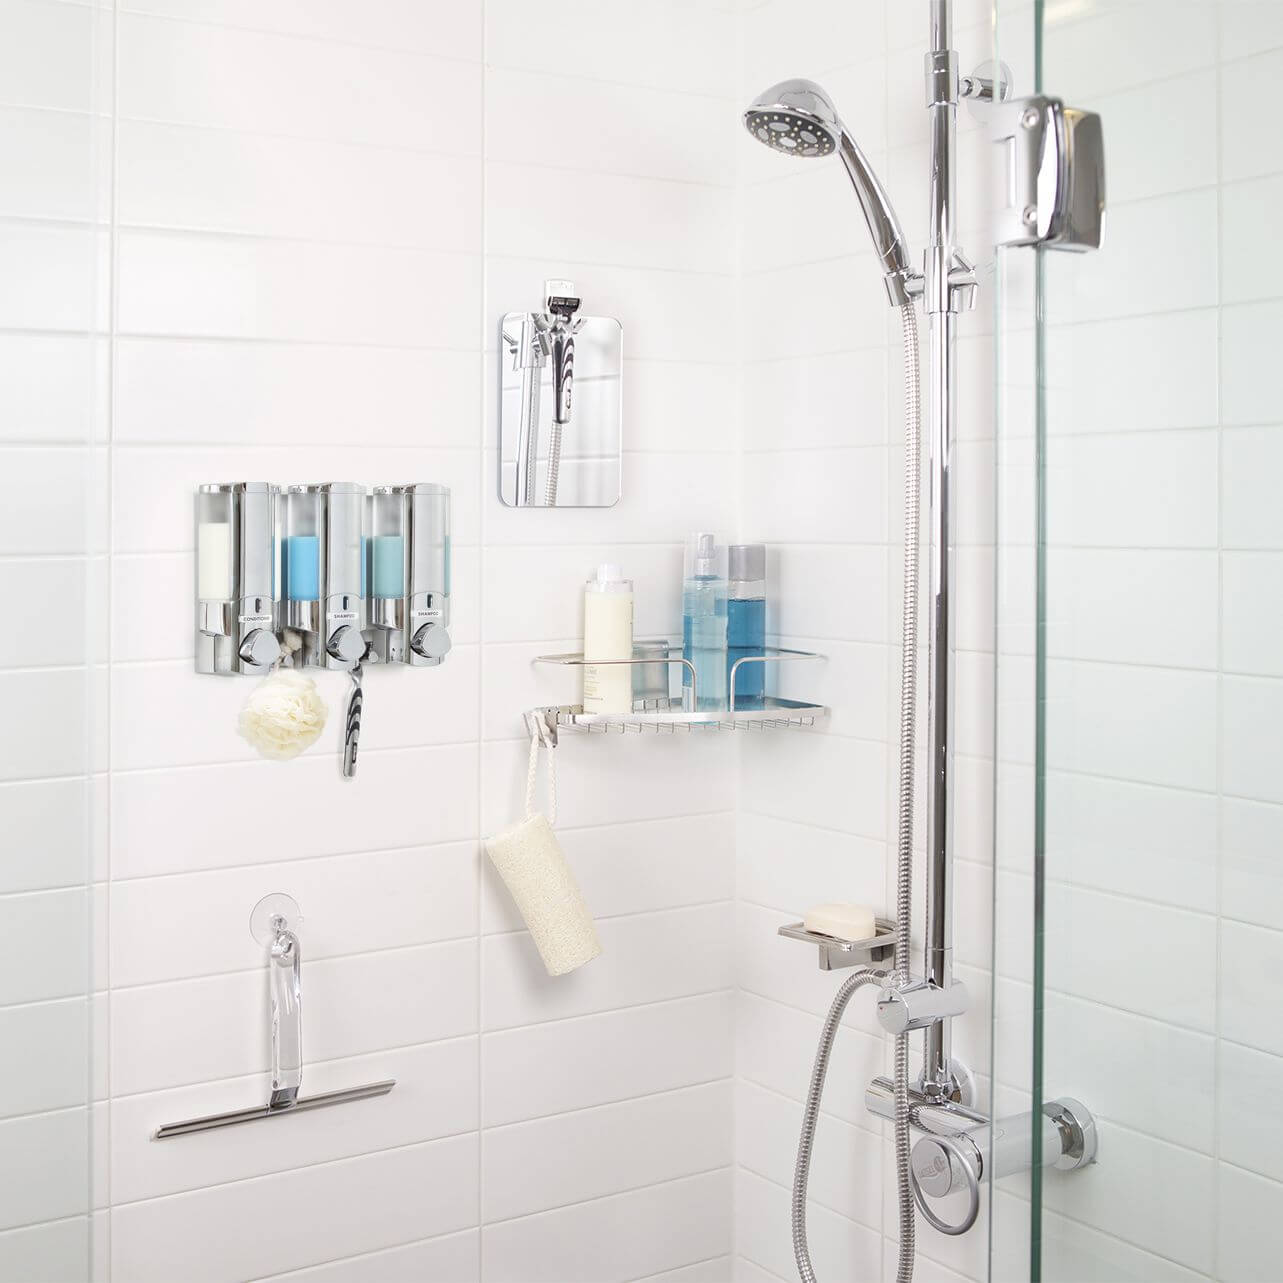 A white shower with stainless steel shower storage items